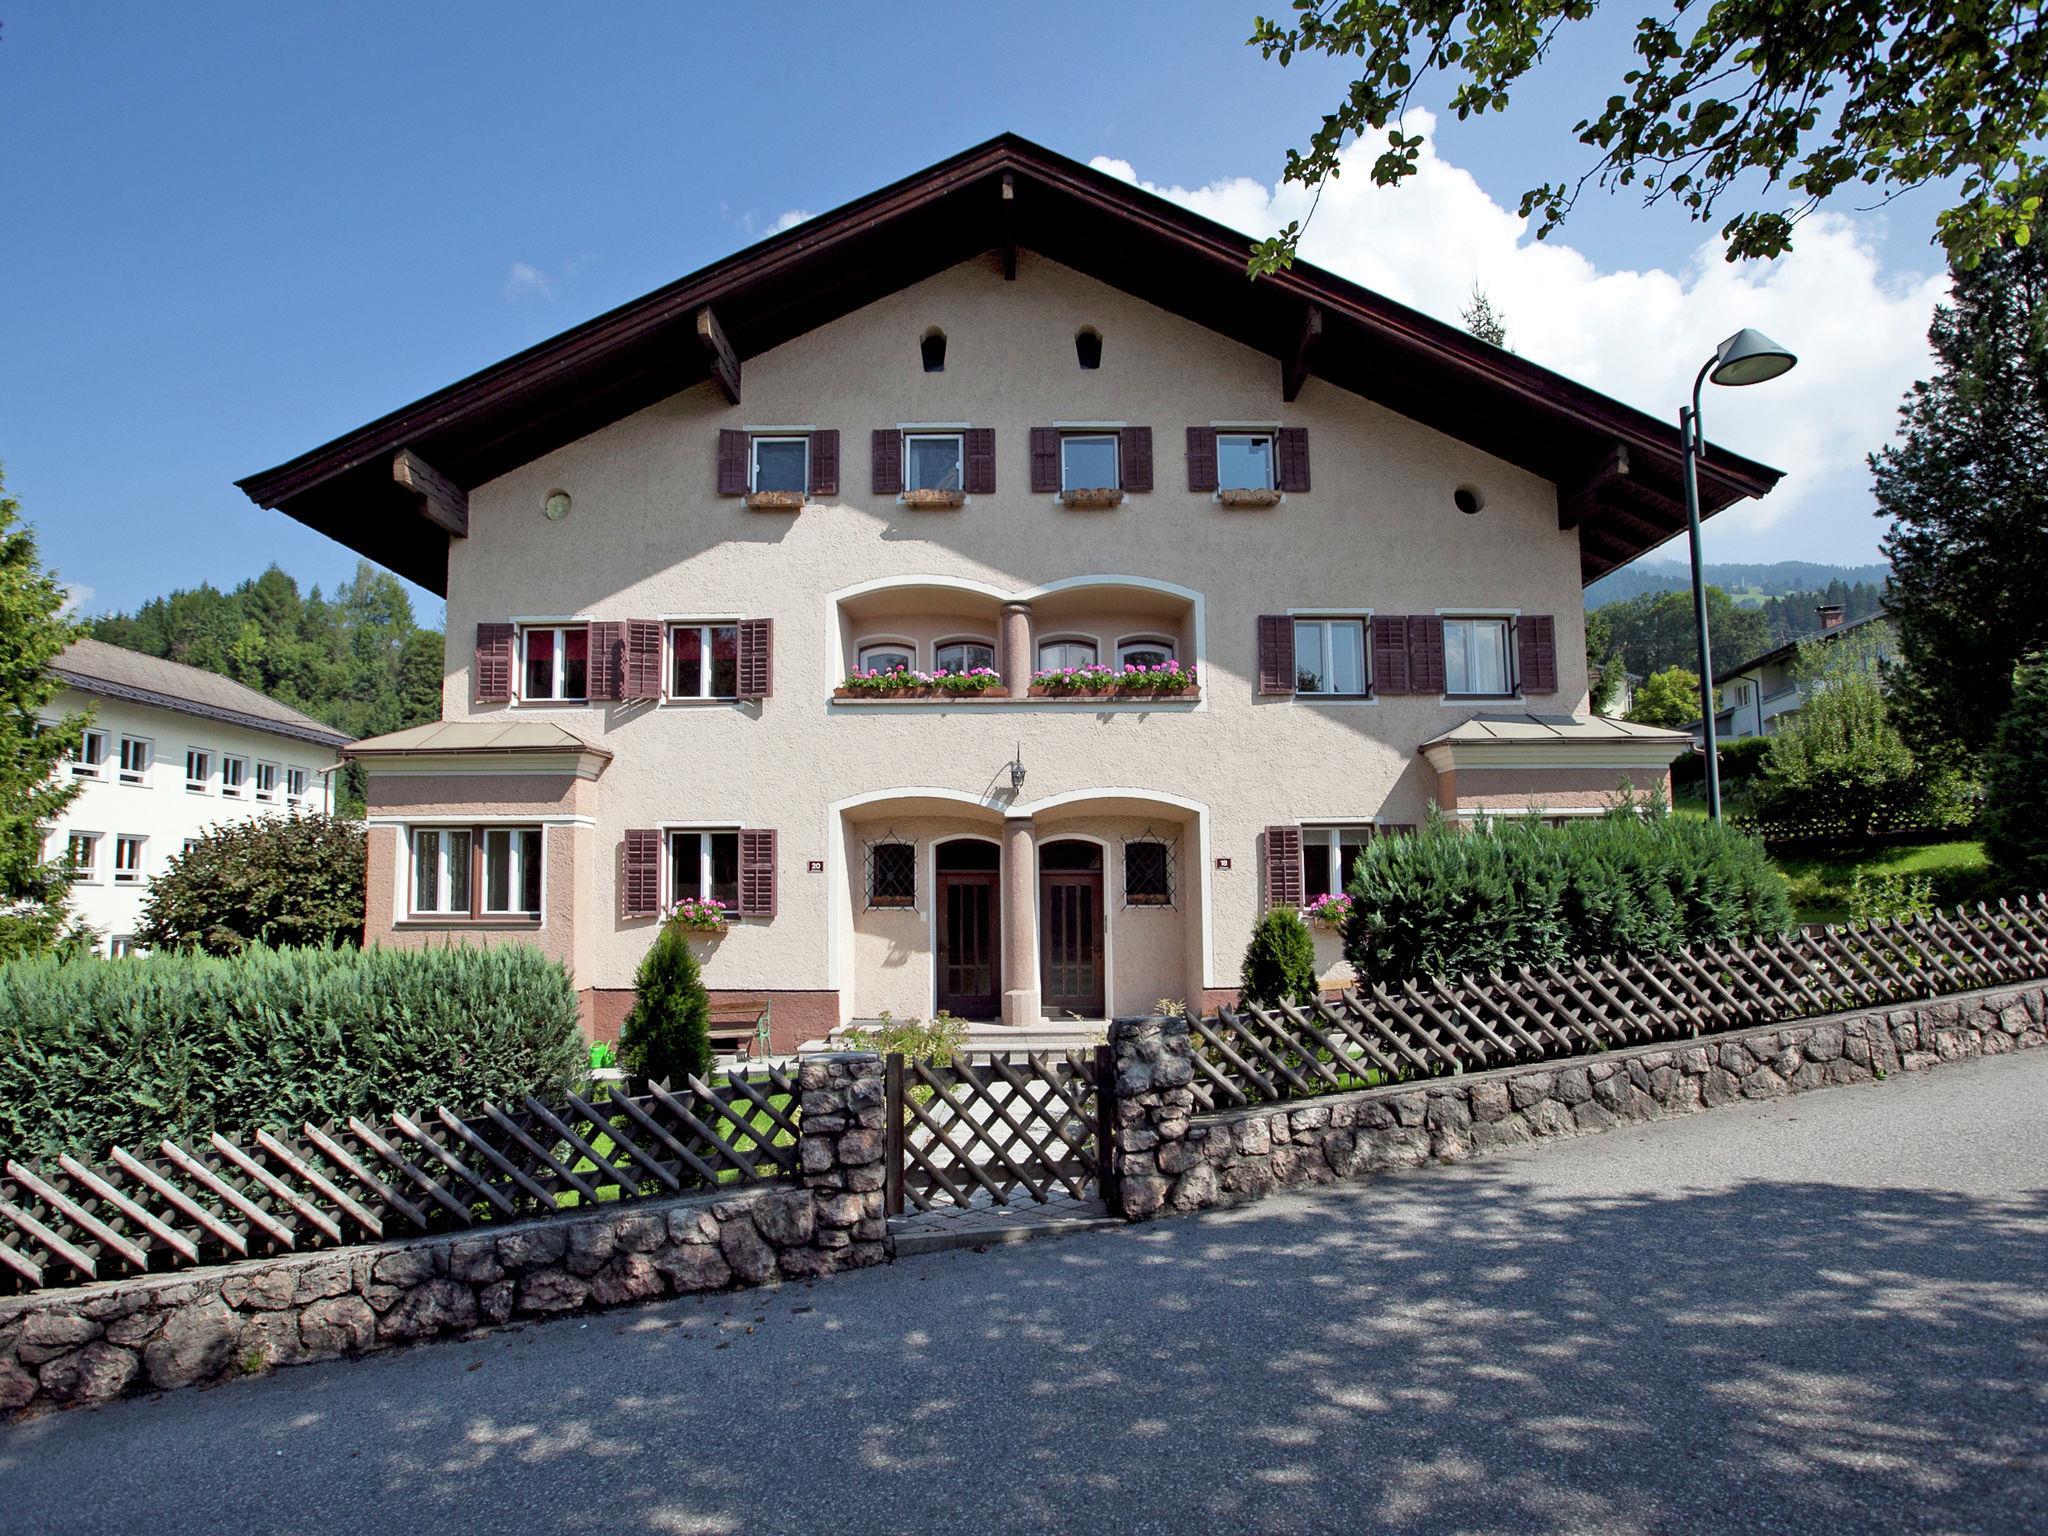 private holiday home Austria_350-AT-6361-32.jpg